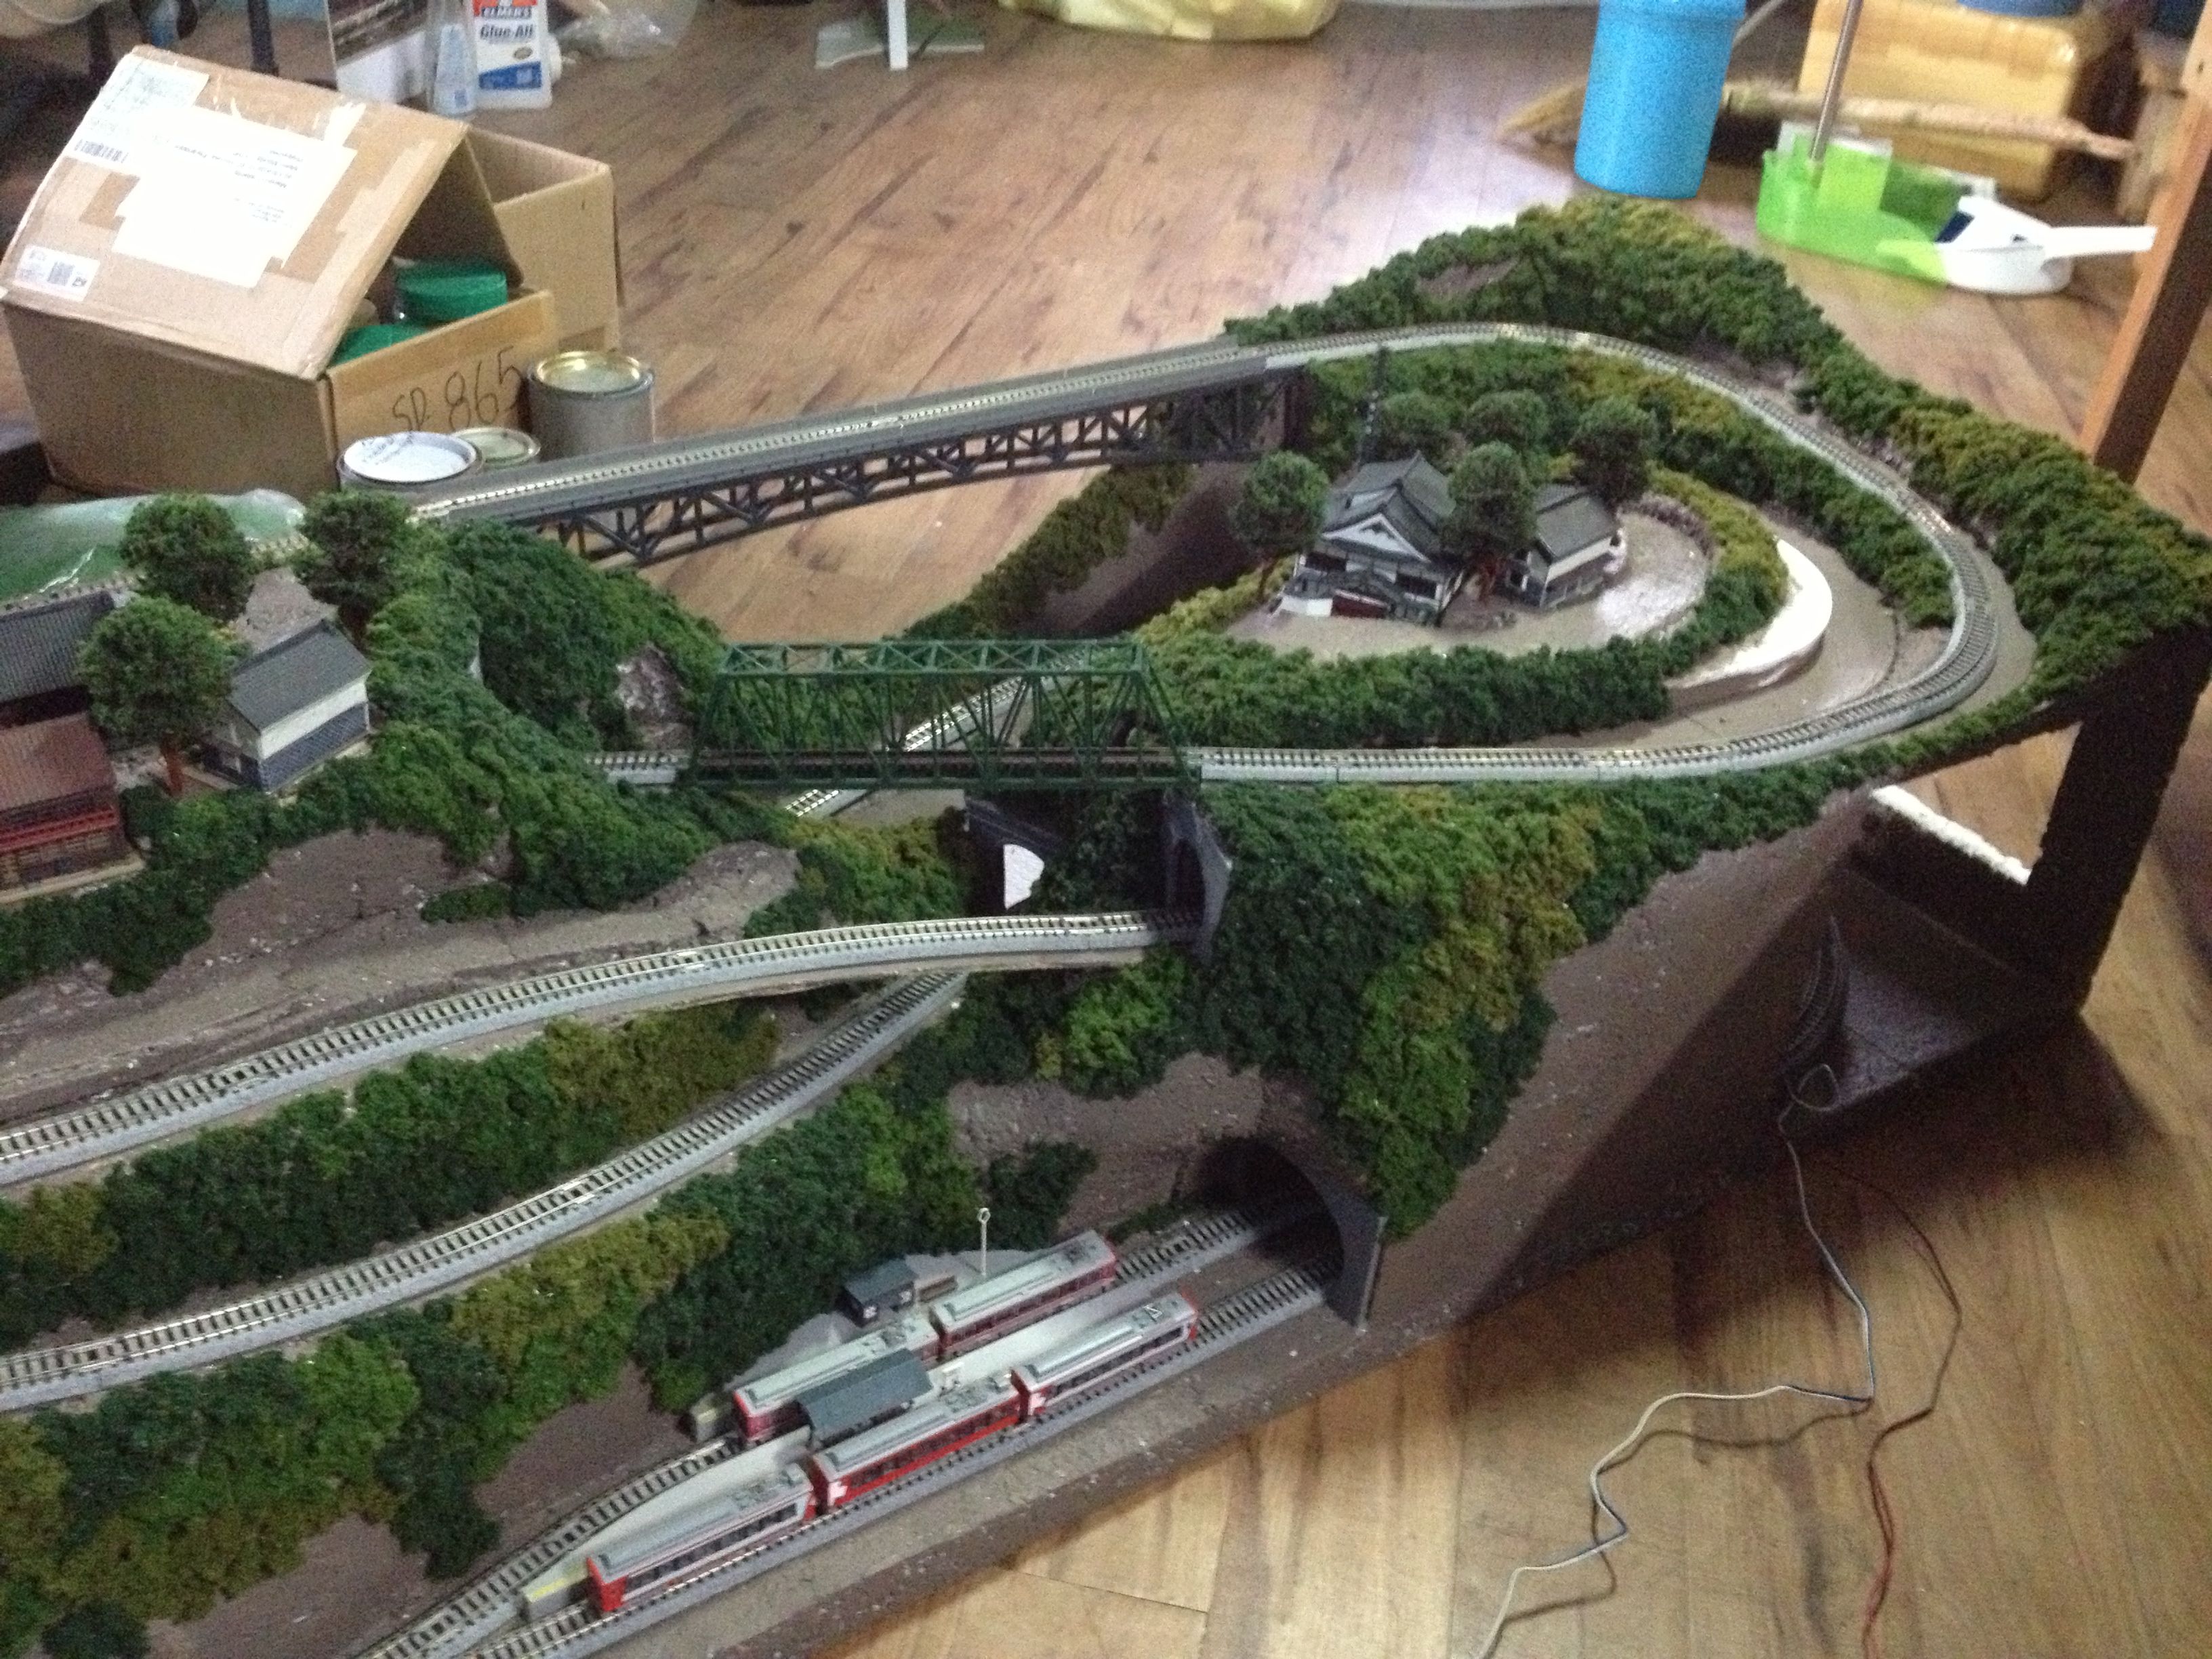 Worbla for use in Train Layouts? - Scenery Techniques & Inspirational  Layouts - JNS Forum